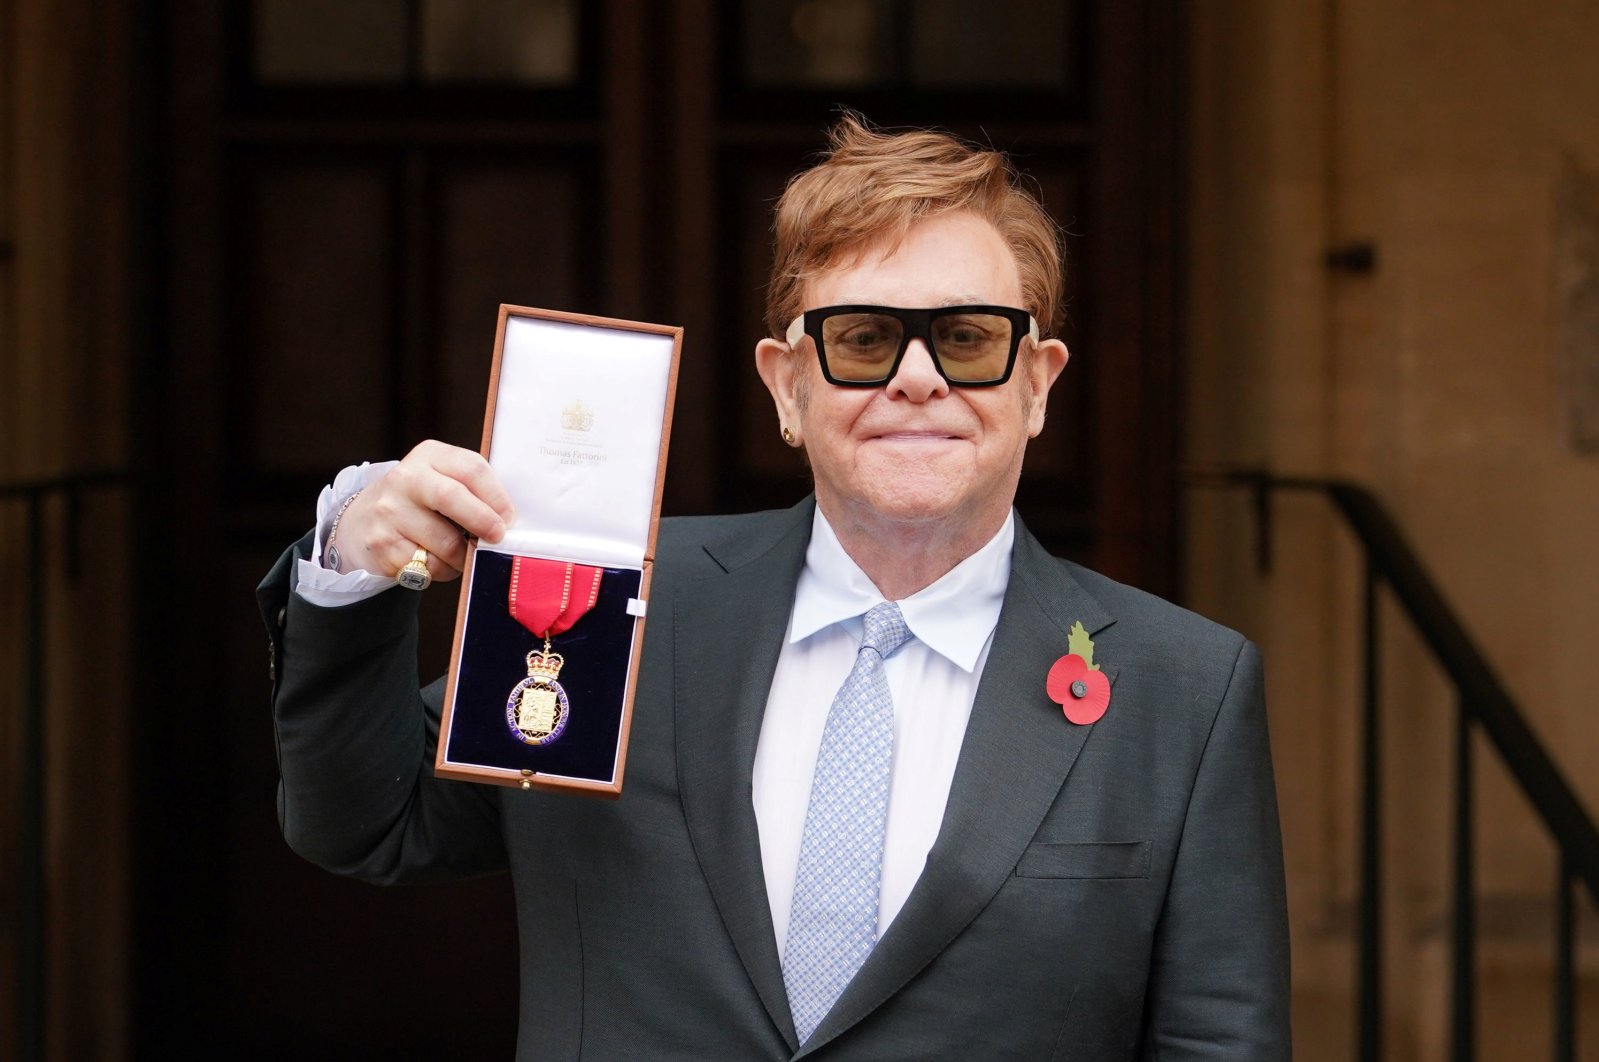 Musician Elton John poses after being made a member of the Order of the Companions of Honour during an investiture ceremony at Windsor Castle in Windsor, Britain, Nov. 10, 2021. (REUTERS)